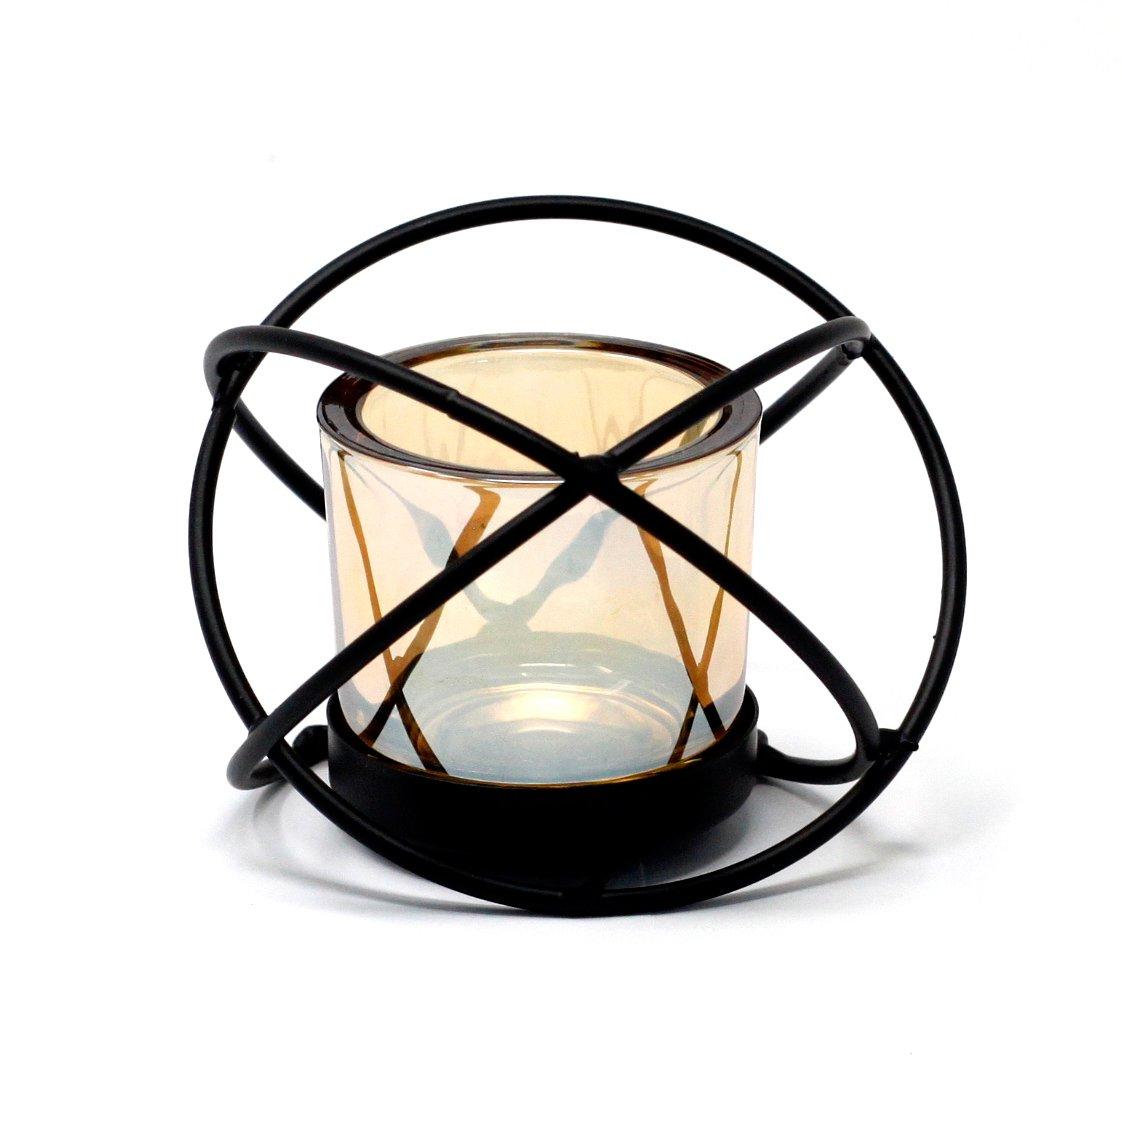 Centrepiece Silhouette Single Cup Gold Amber Glass And Iron Votive Tealight Candle Holder.